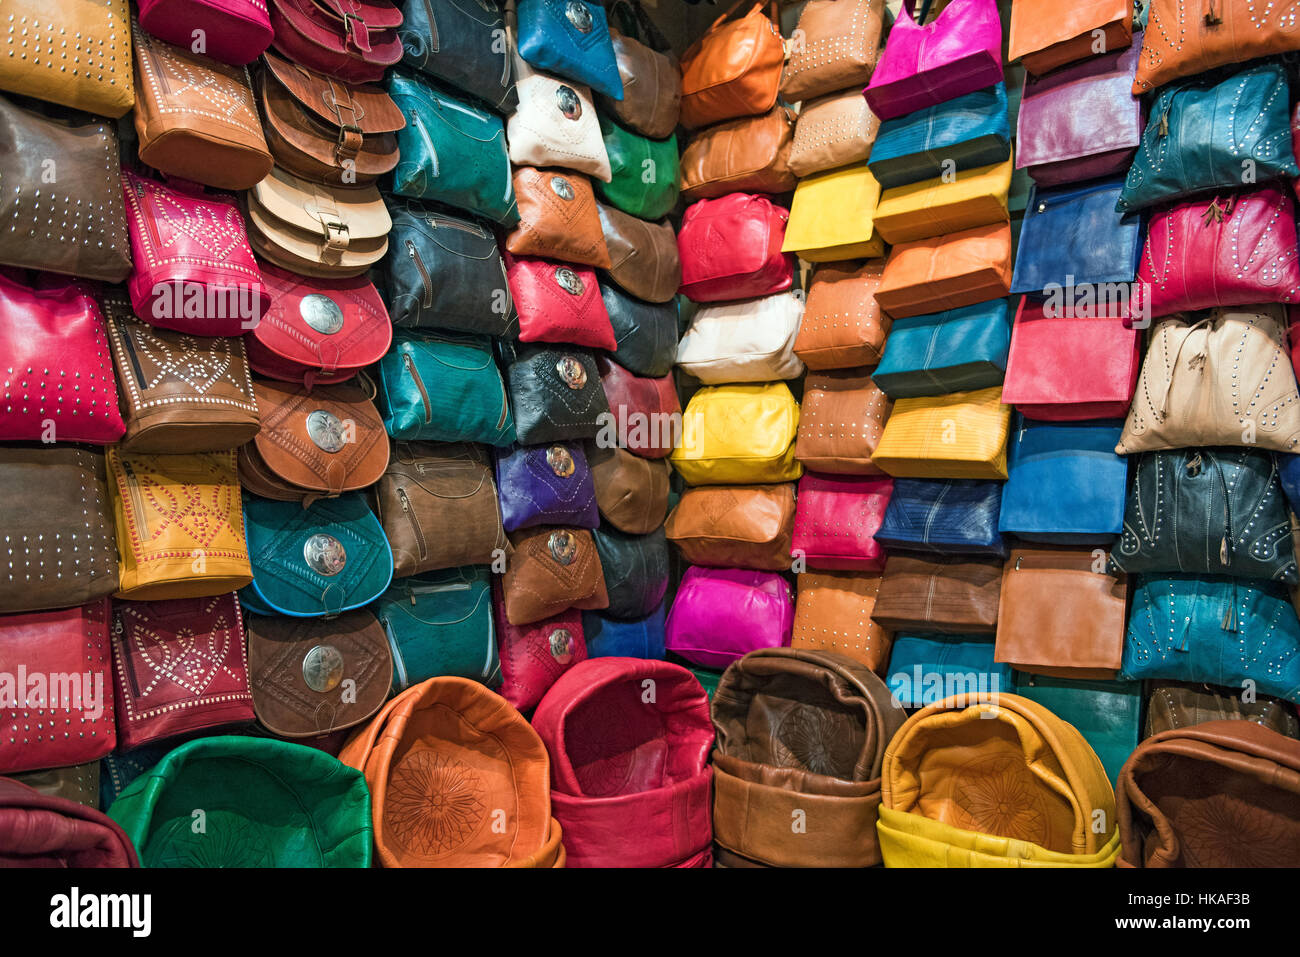 Colorful leather bag display in Fes, Morocco Stock Photo